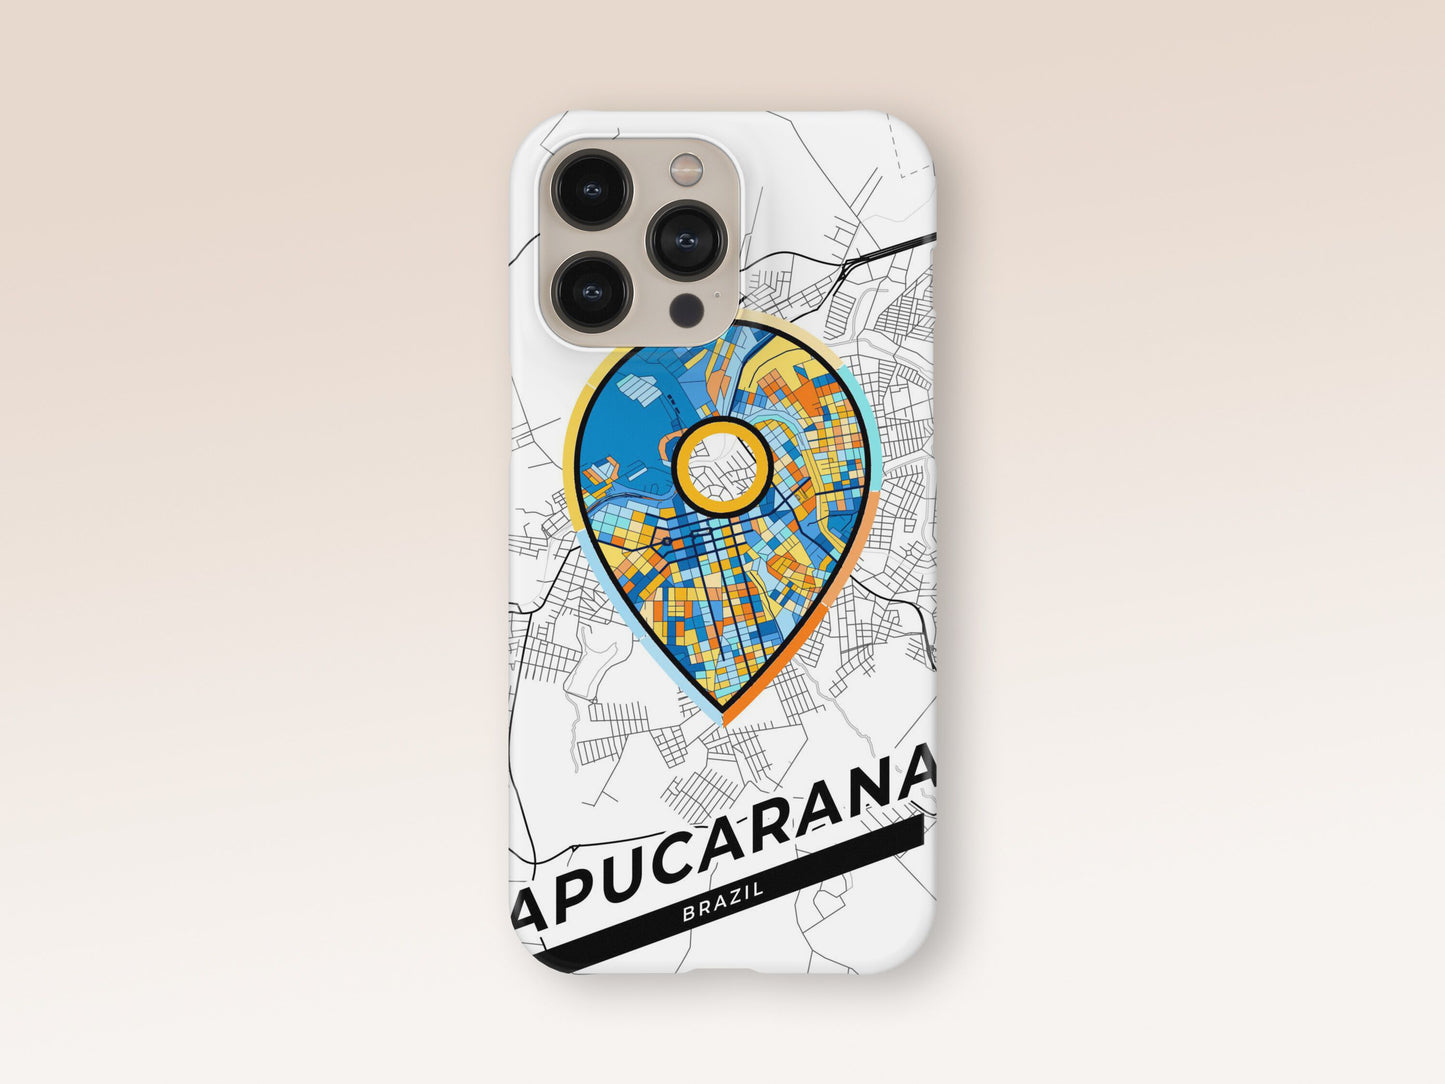 Apucarana Brazil slim phone case with colorful icon. Birthday, wedding or housewarming gift. Couple match cases. 1